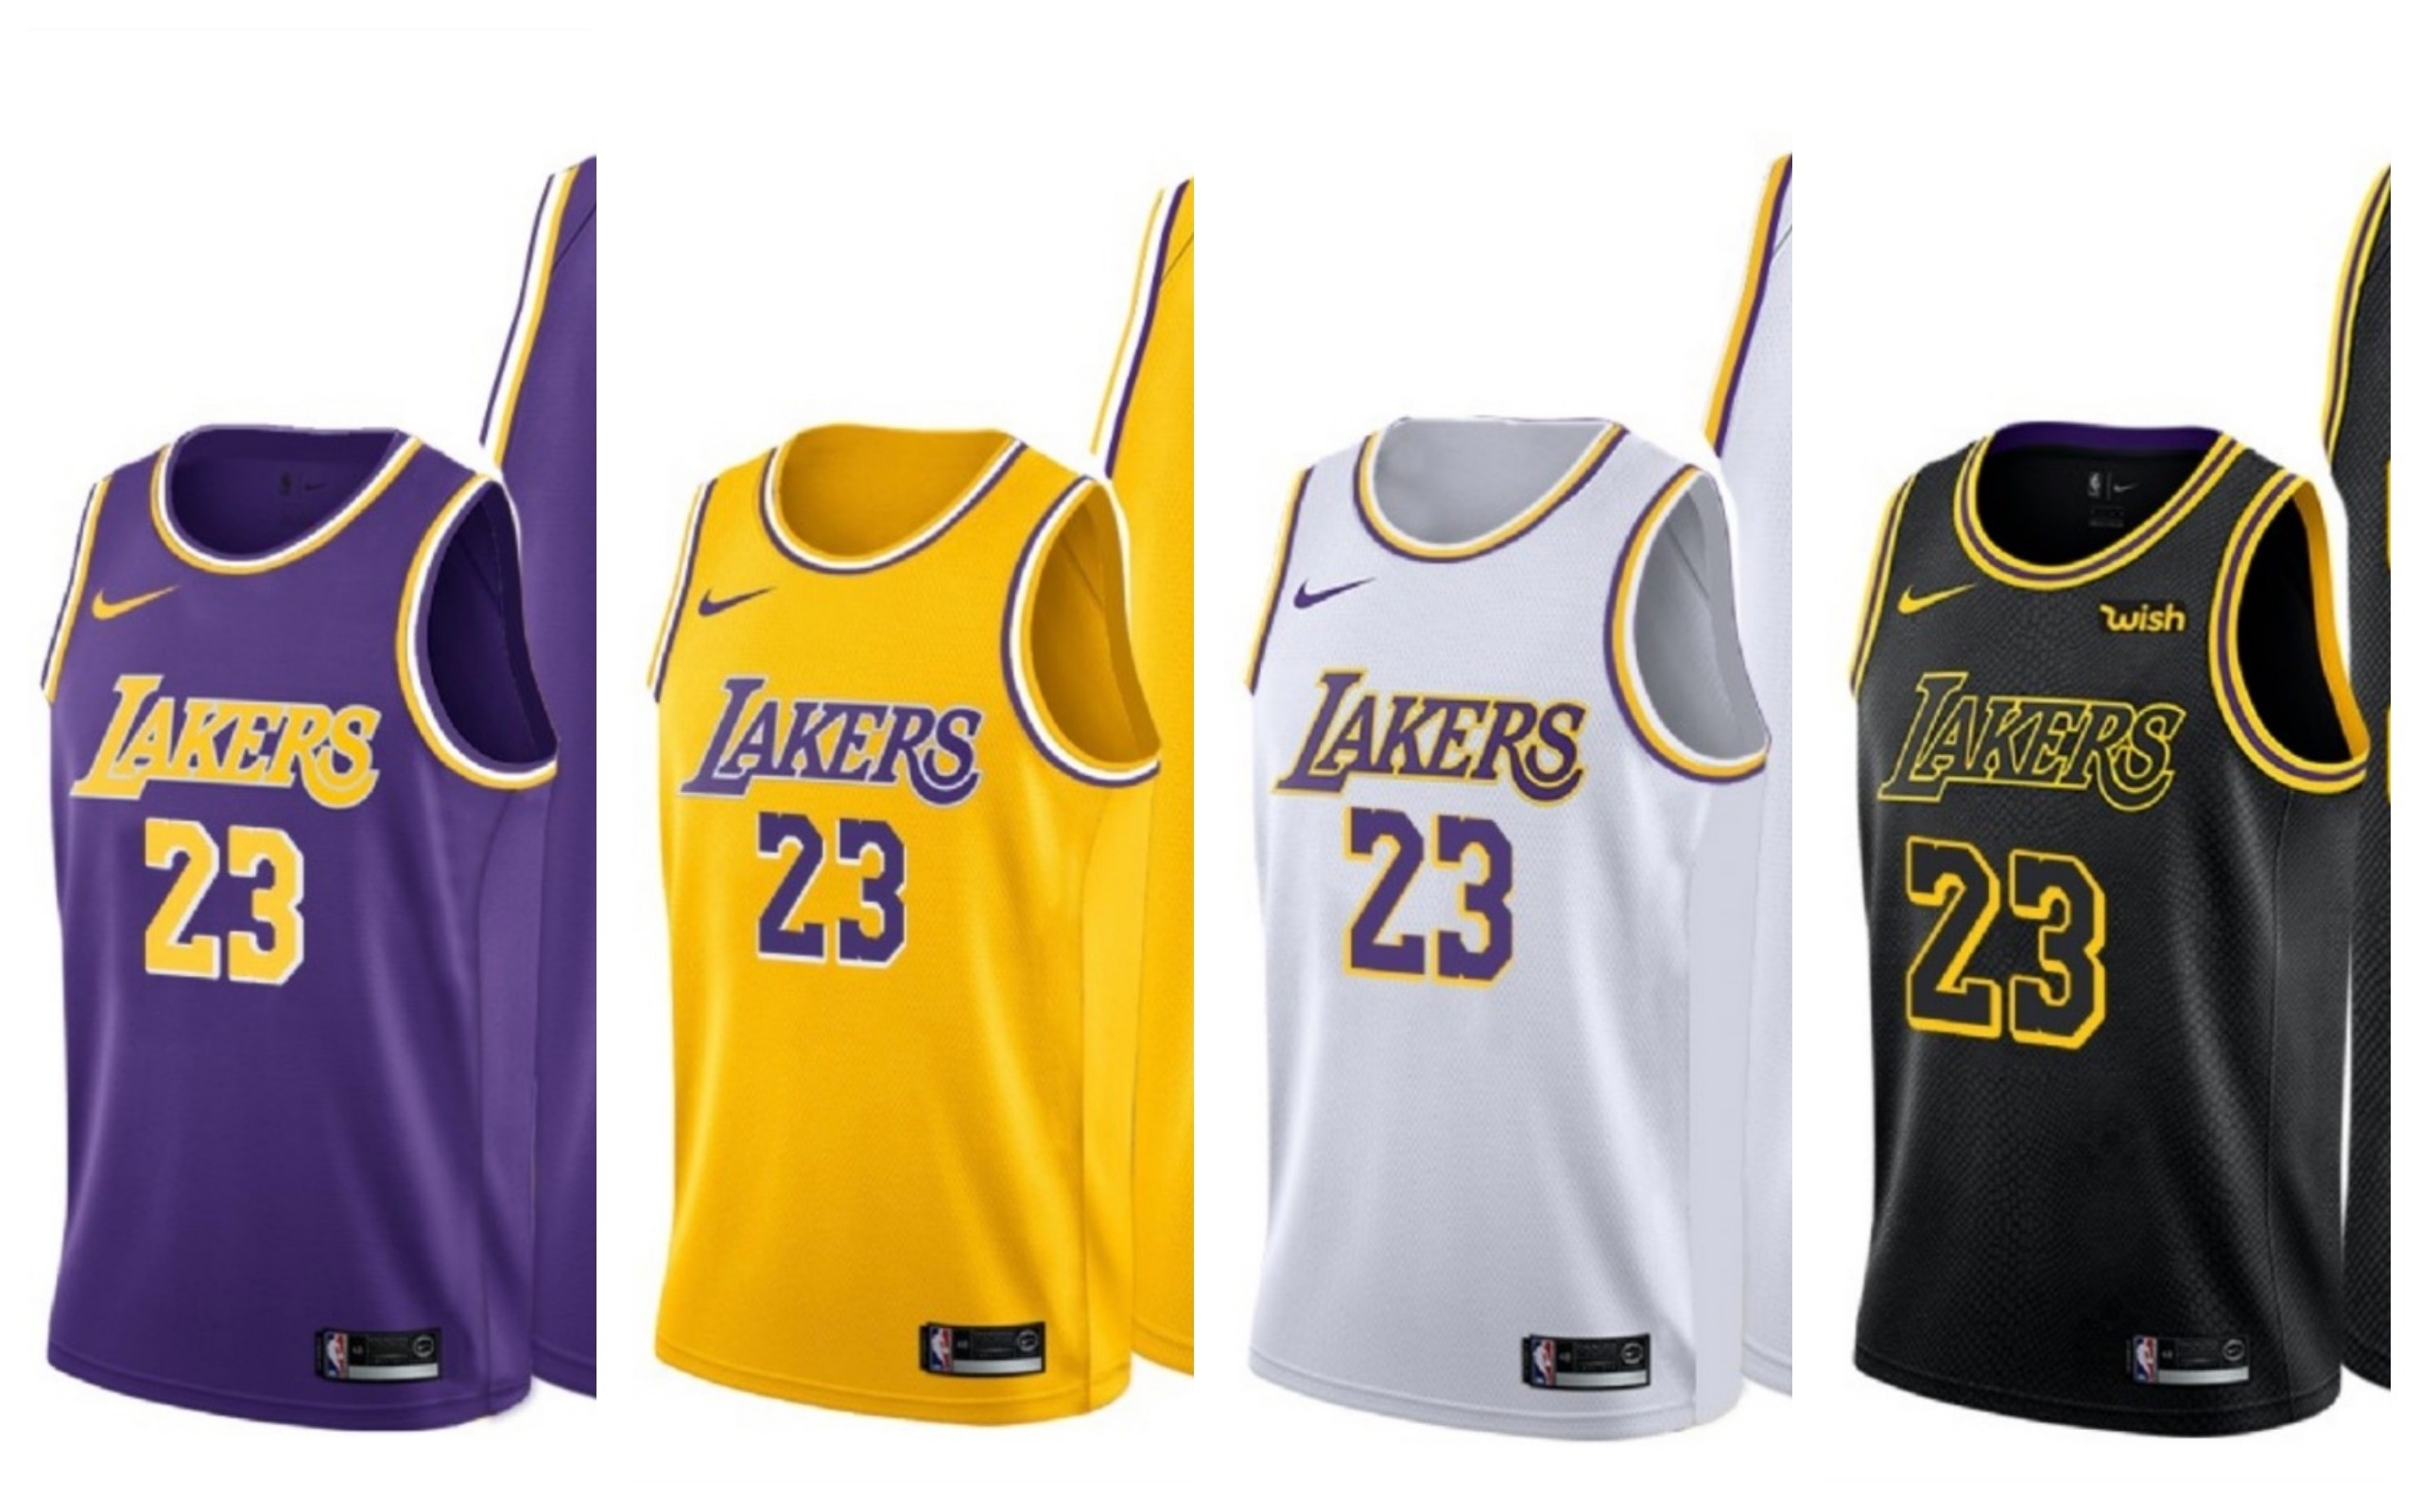 new lakers jersey